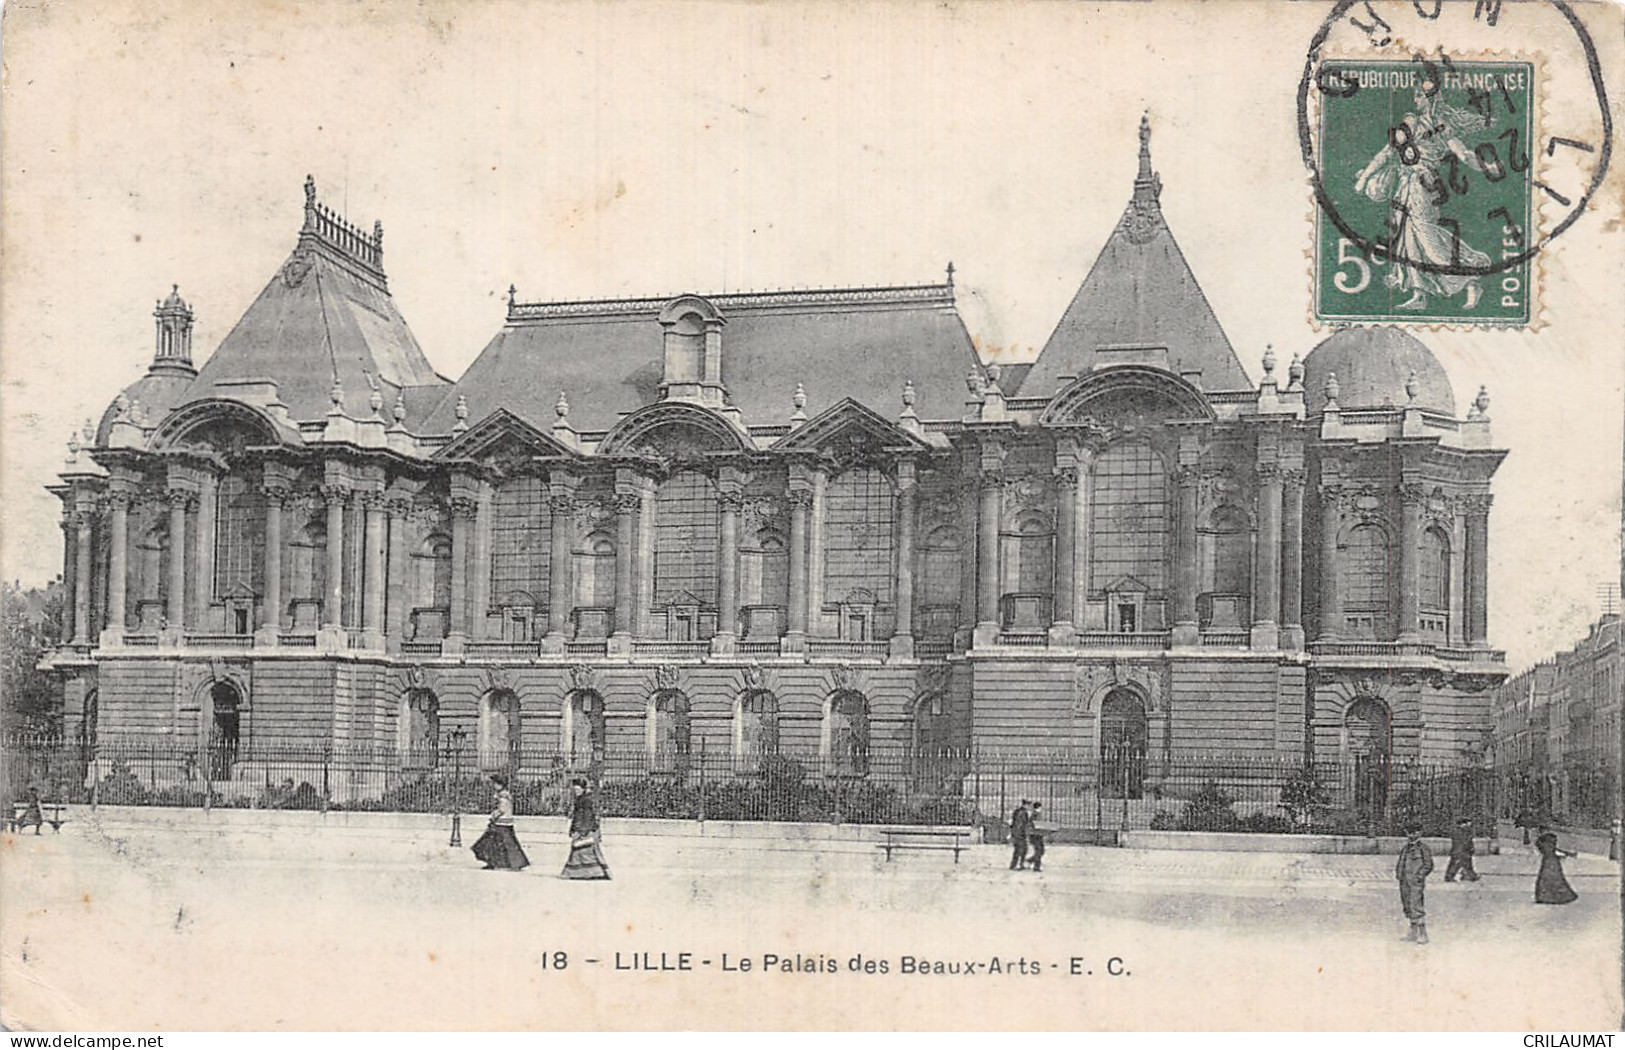 59-LILLE-N°T5093-B/0249 - Lille